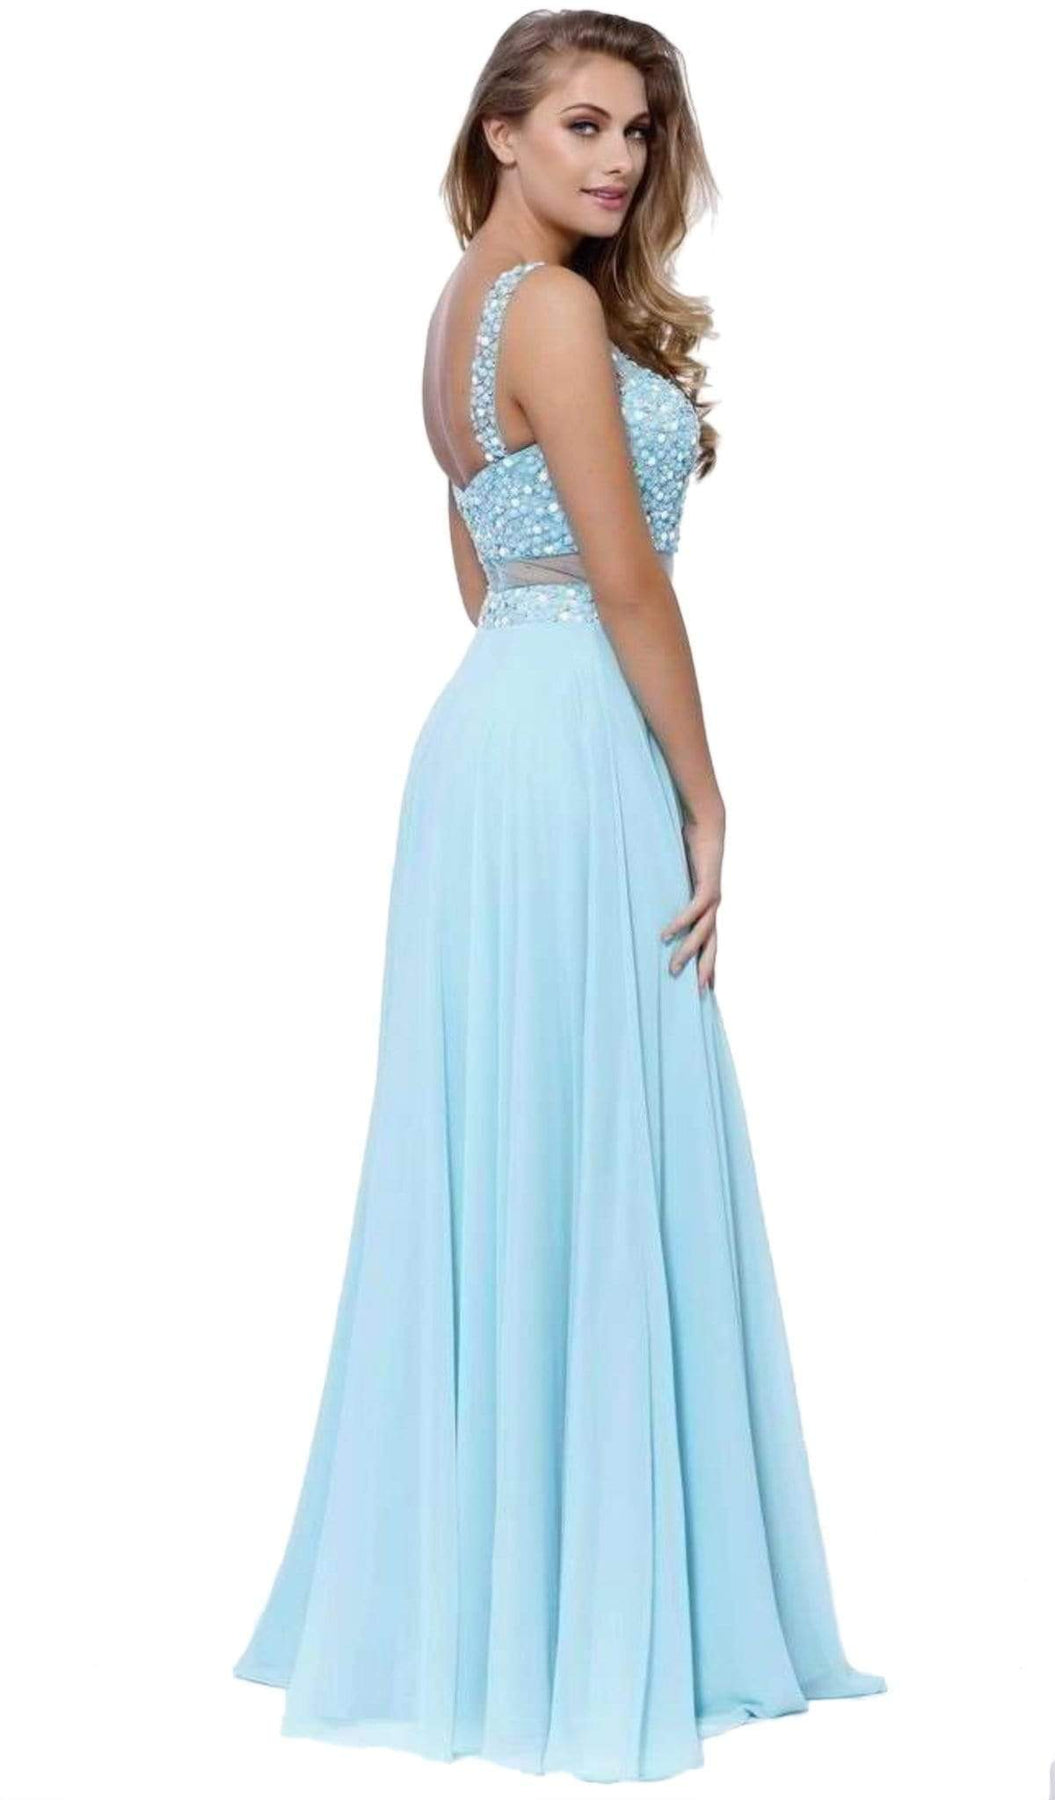 Nox Anabel - 8251 Sheer Beaded Illusion Evening Gown Special Occasion Dress